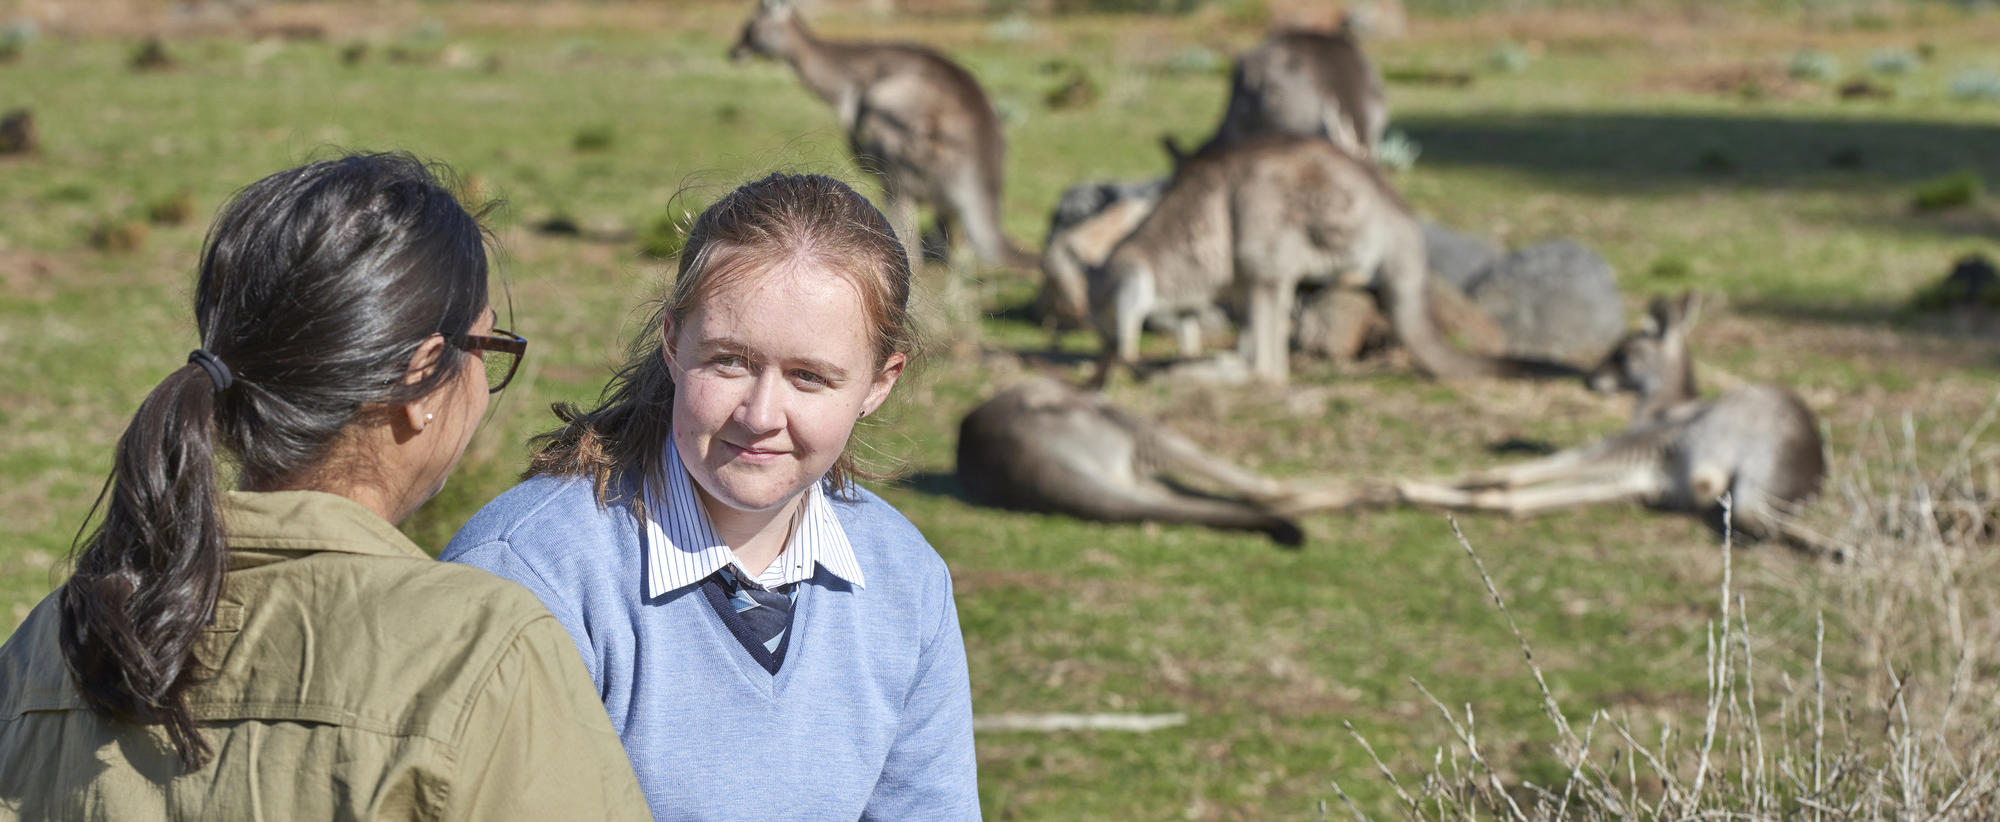 A student in light blue school uniform has her back to a pack of kangaroos in a field as she talks with someone in a khaki uniform